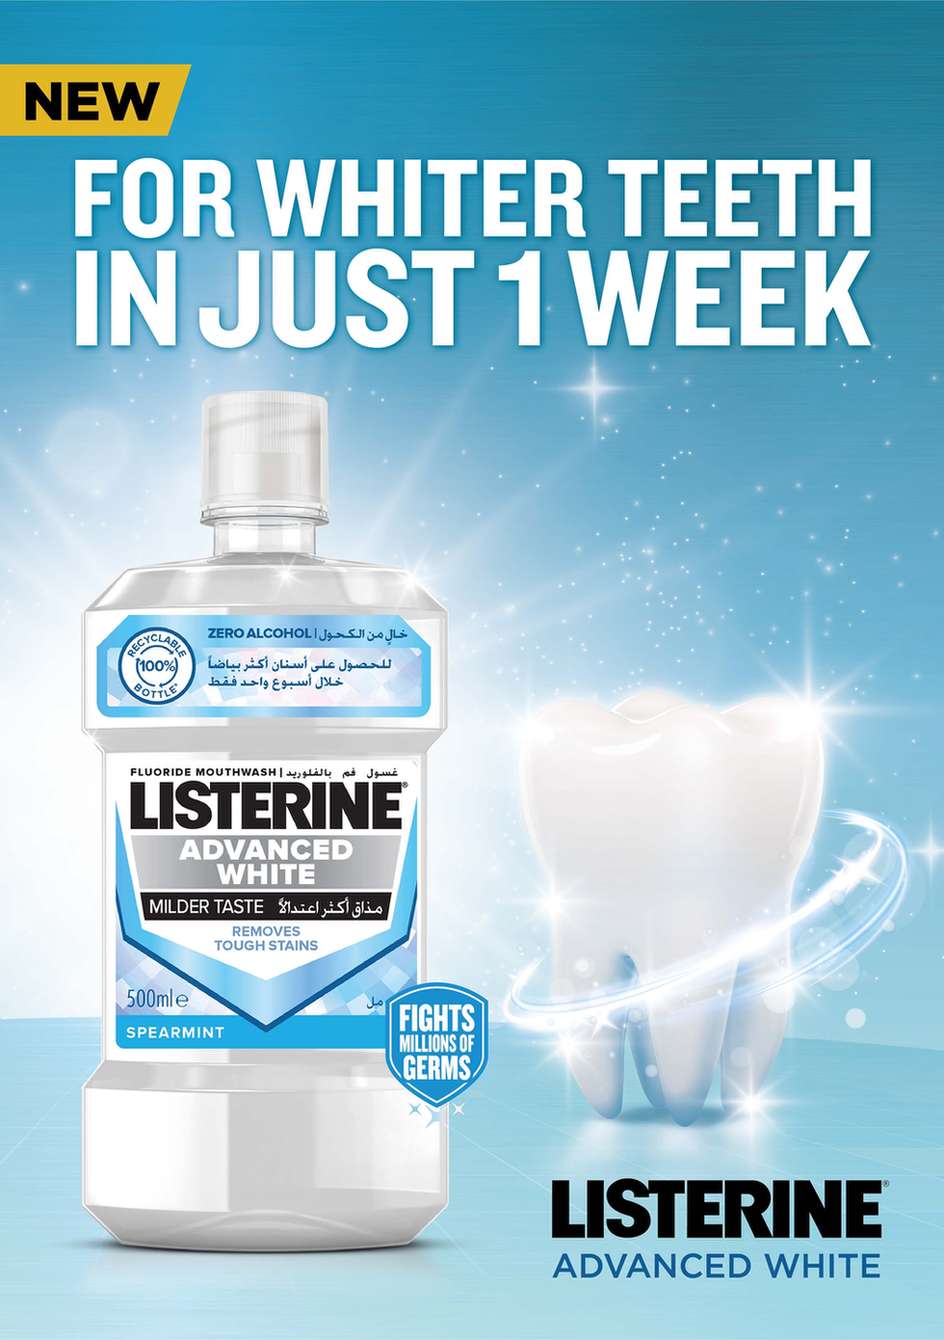 LISTERINE® Mouthwash & Oral Care Products